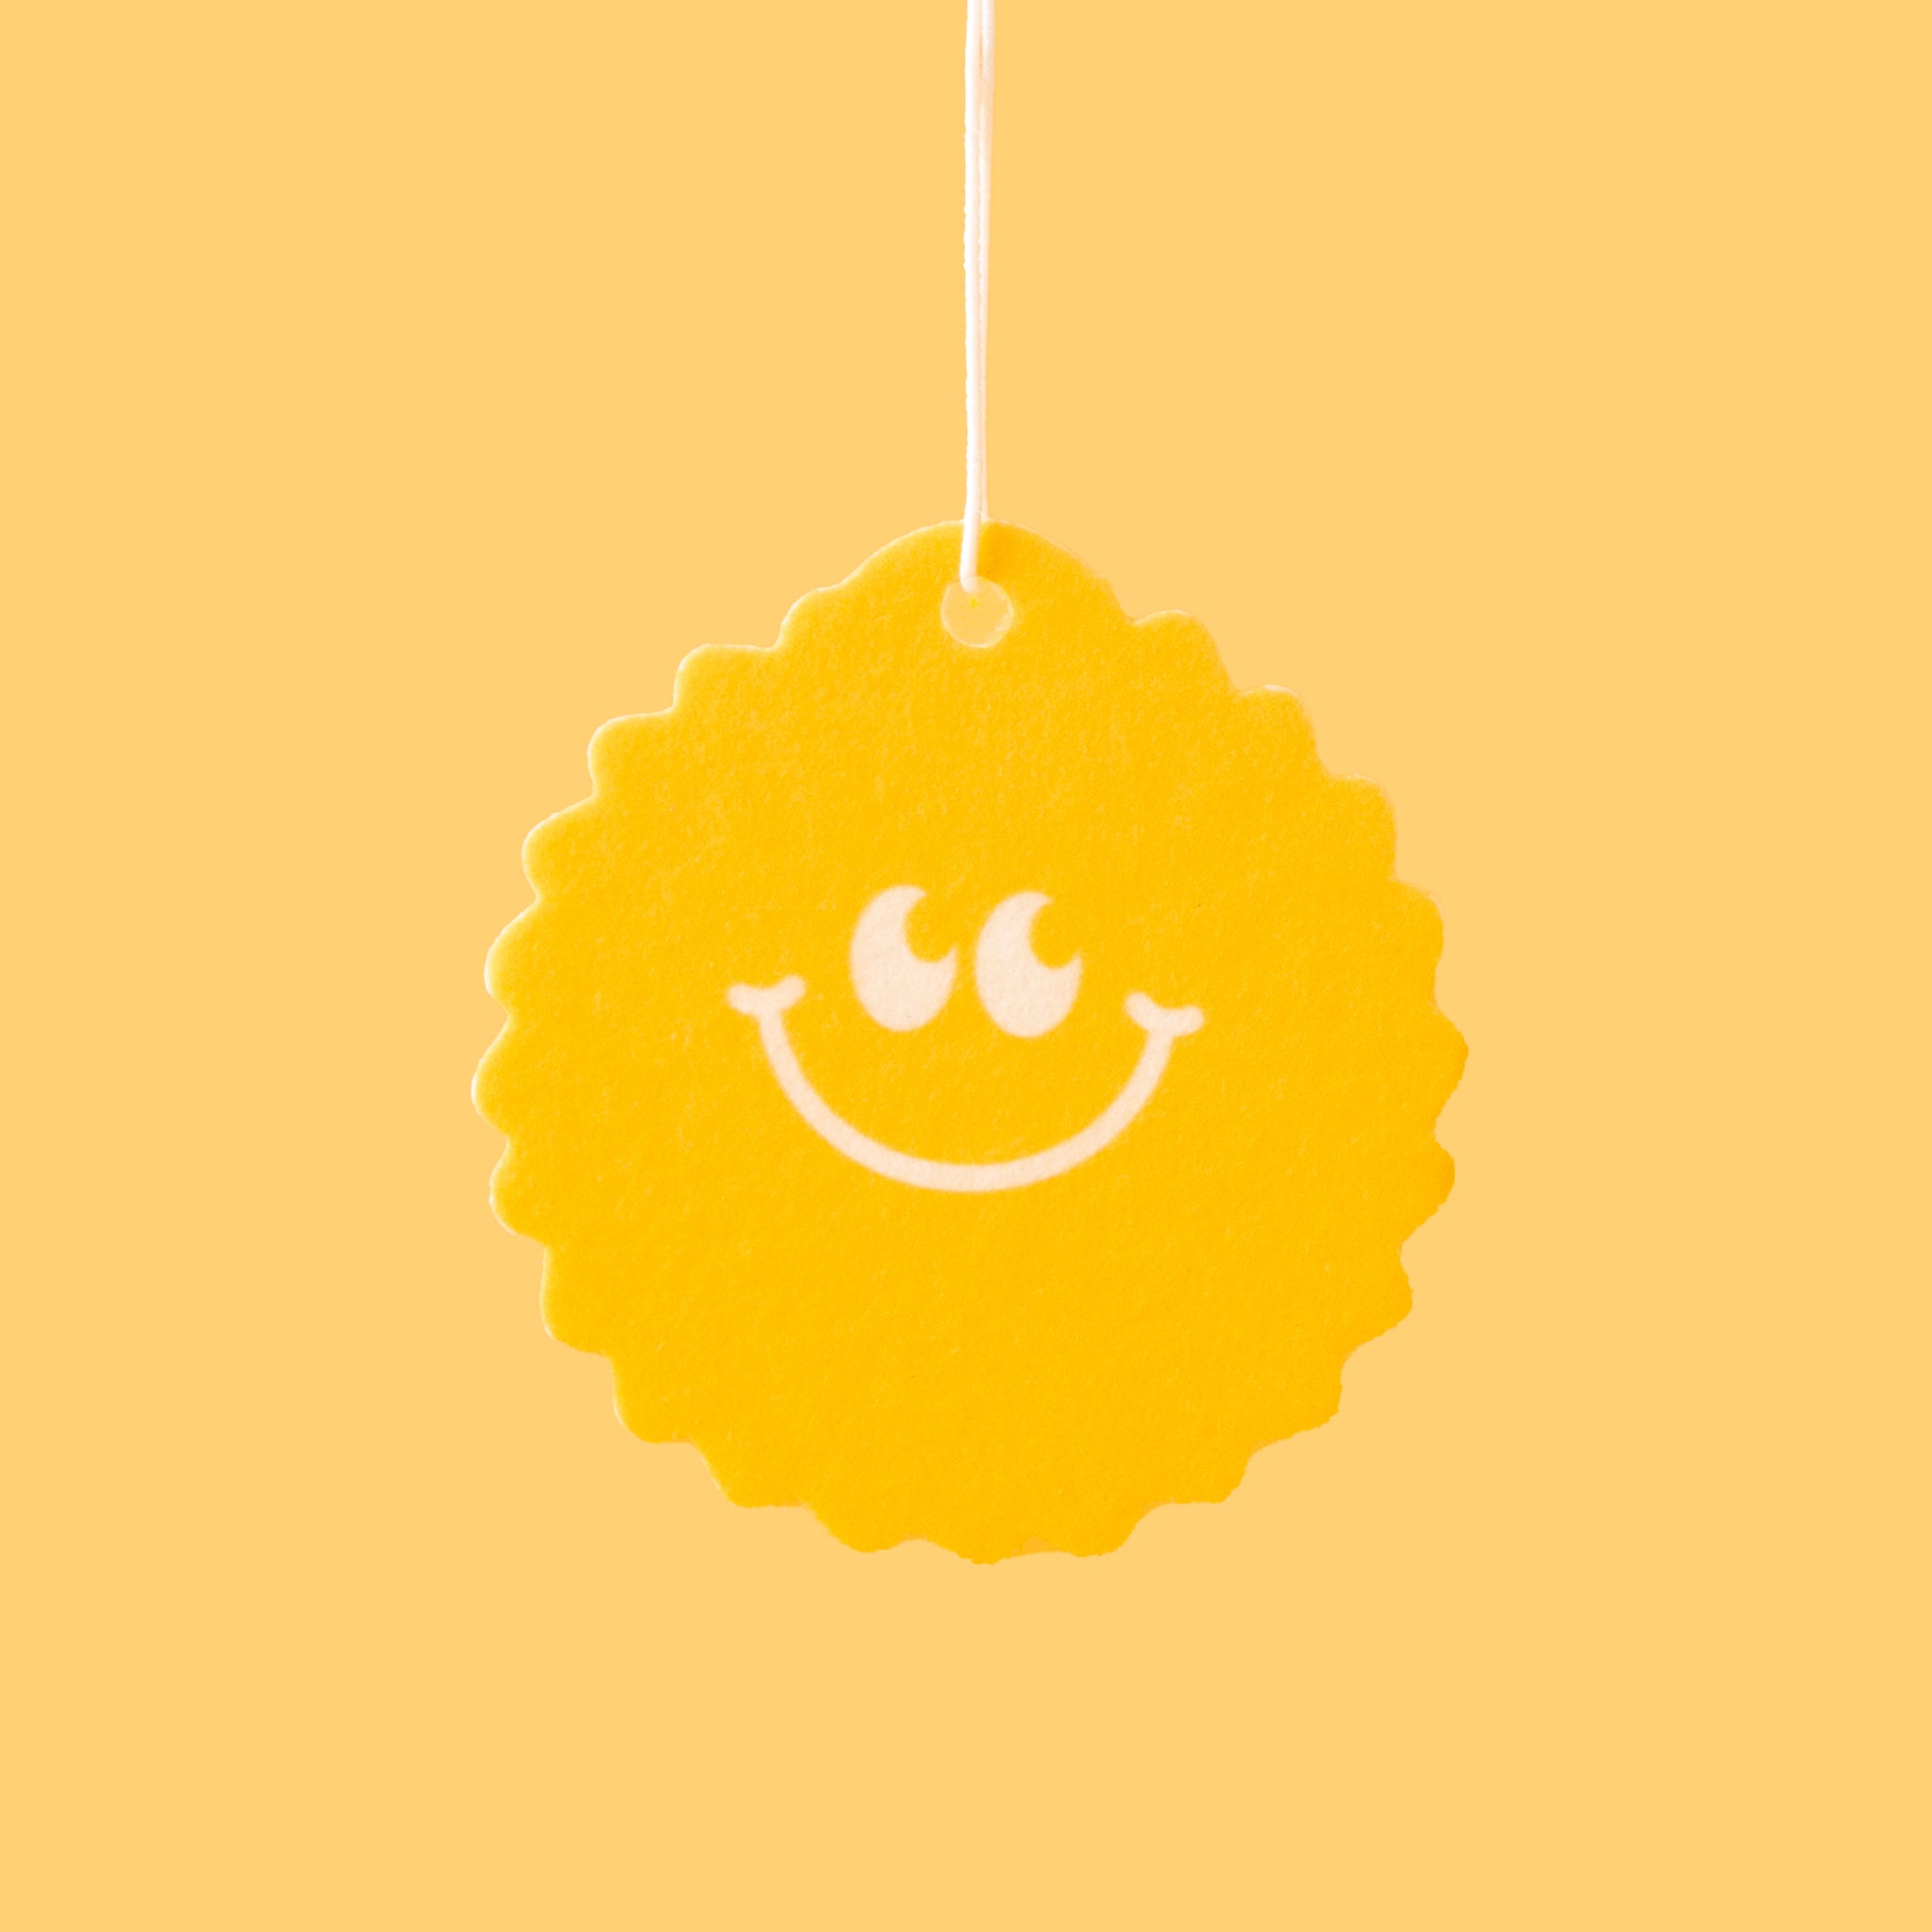 On a yellow background is a yellow sunshine shaped air freshener with a smiley face and a white hanging string. 